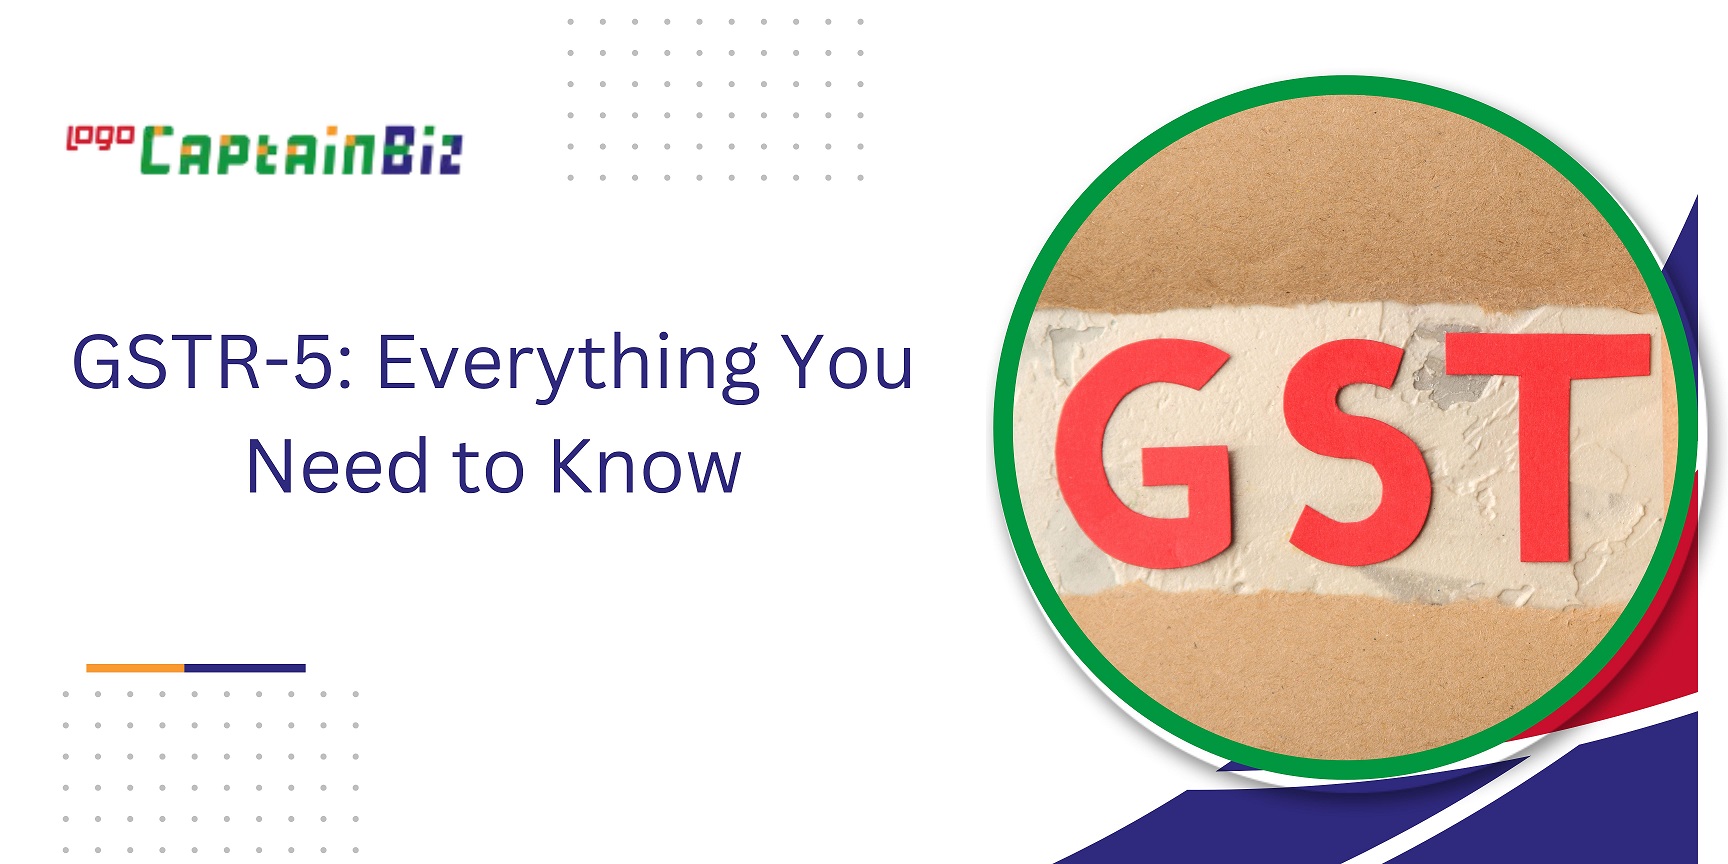 CaptainBiz: GSTR-5 Everything You Need to Know